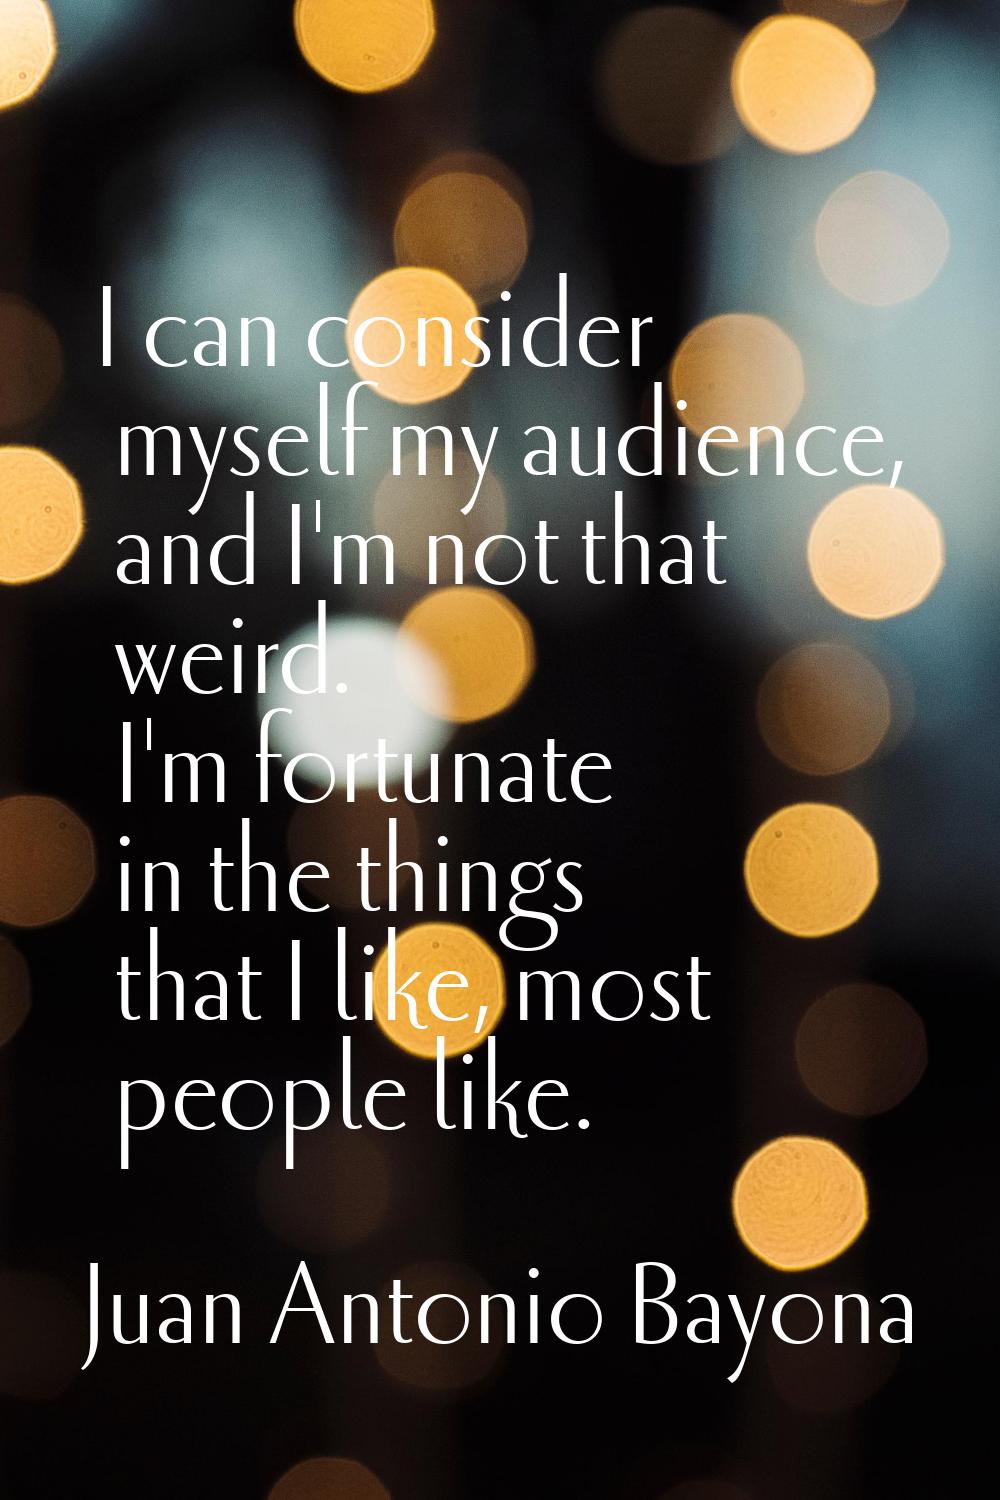 I can consider myself my audience, and I'm not that weird. I'm fortunate in the things that I like,